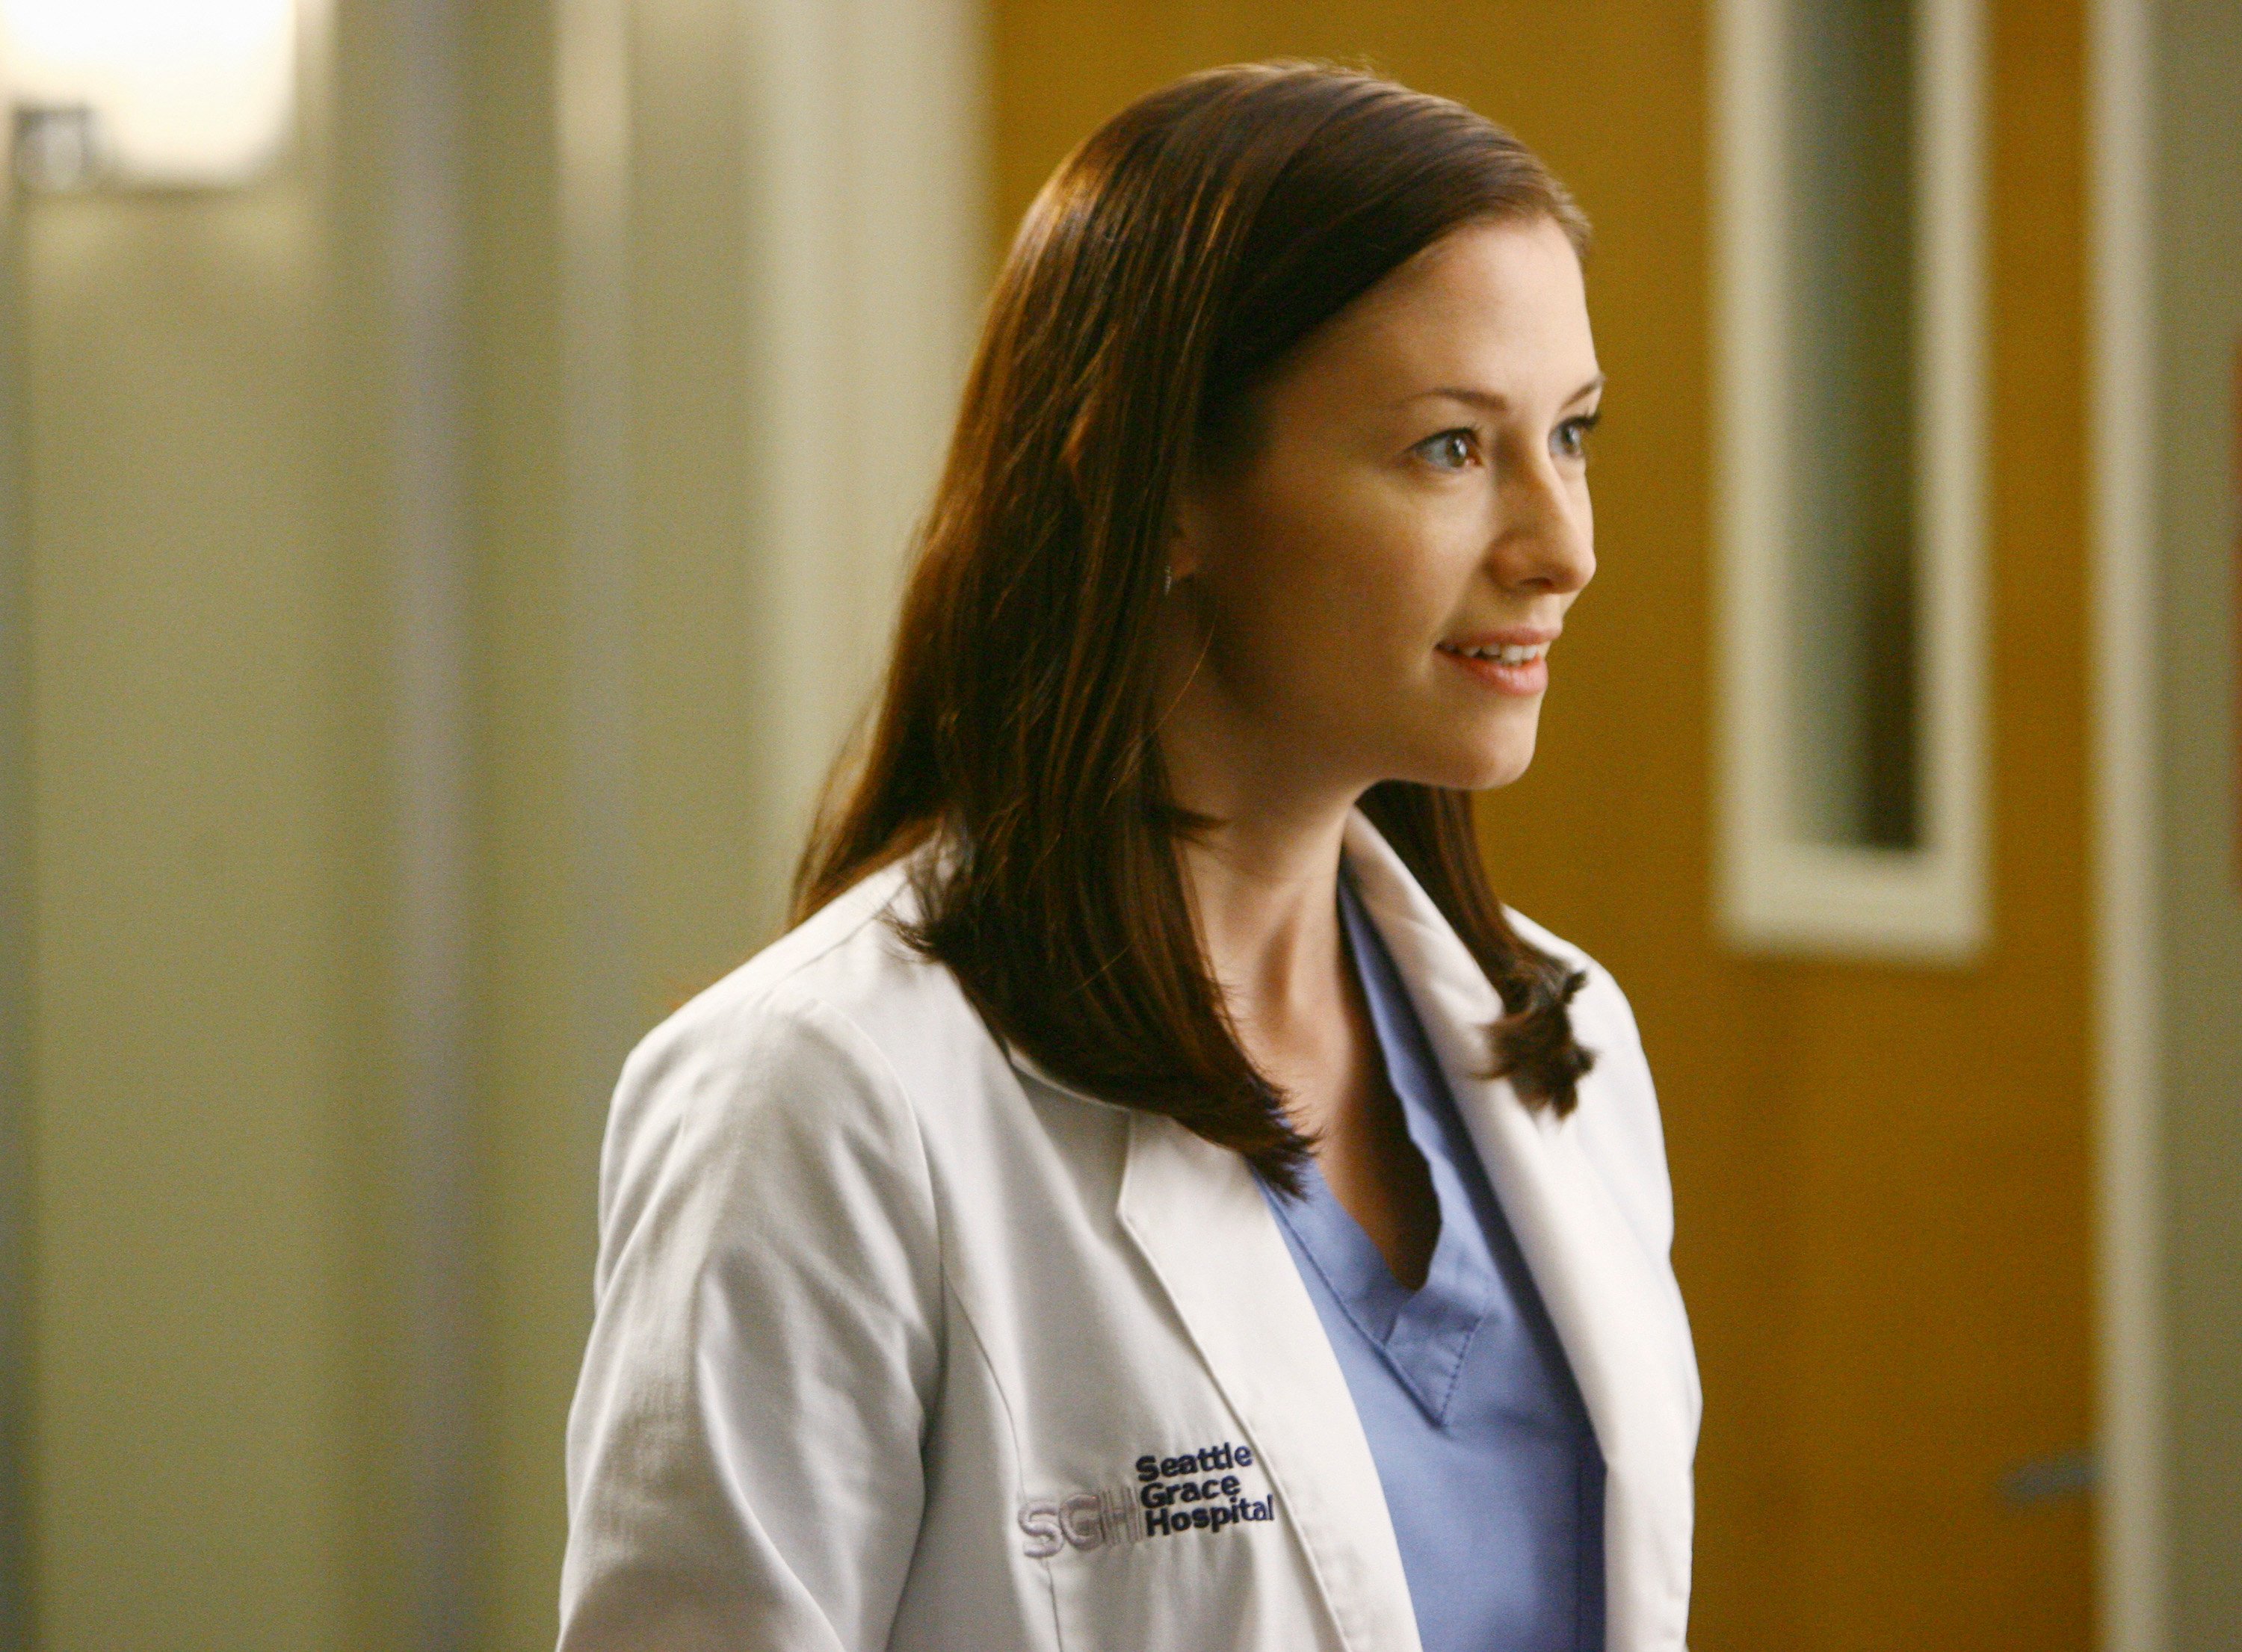 Chyler Leigh of 'Grey's Anatomy' in medical scrubs and lab coat